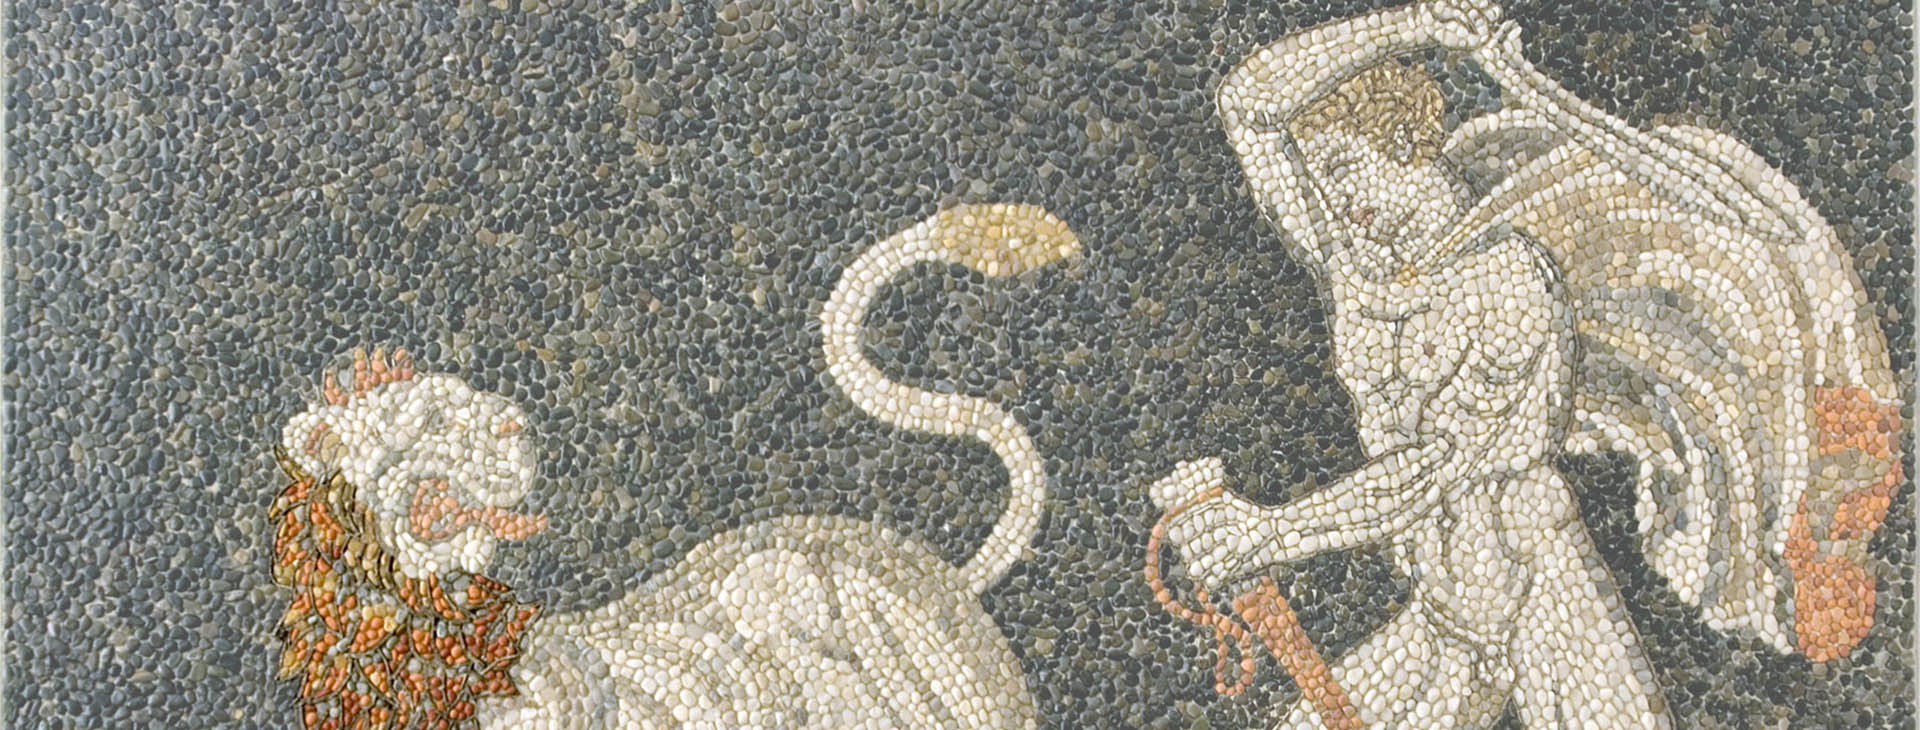 Lion Hunt Mosaic, archaeological site of Pella, the capital of ancient Macedonia